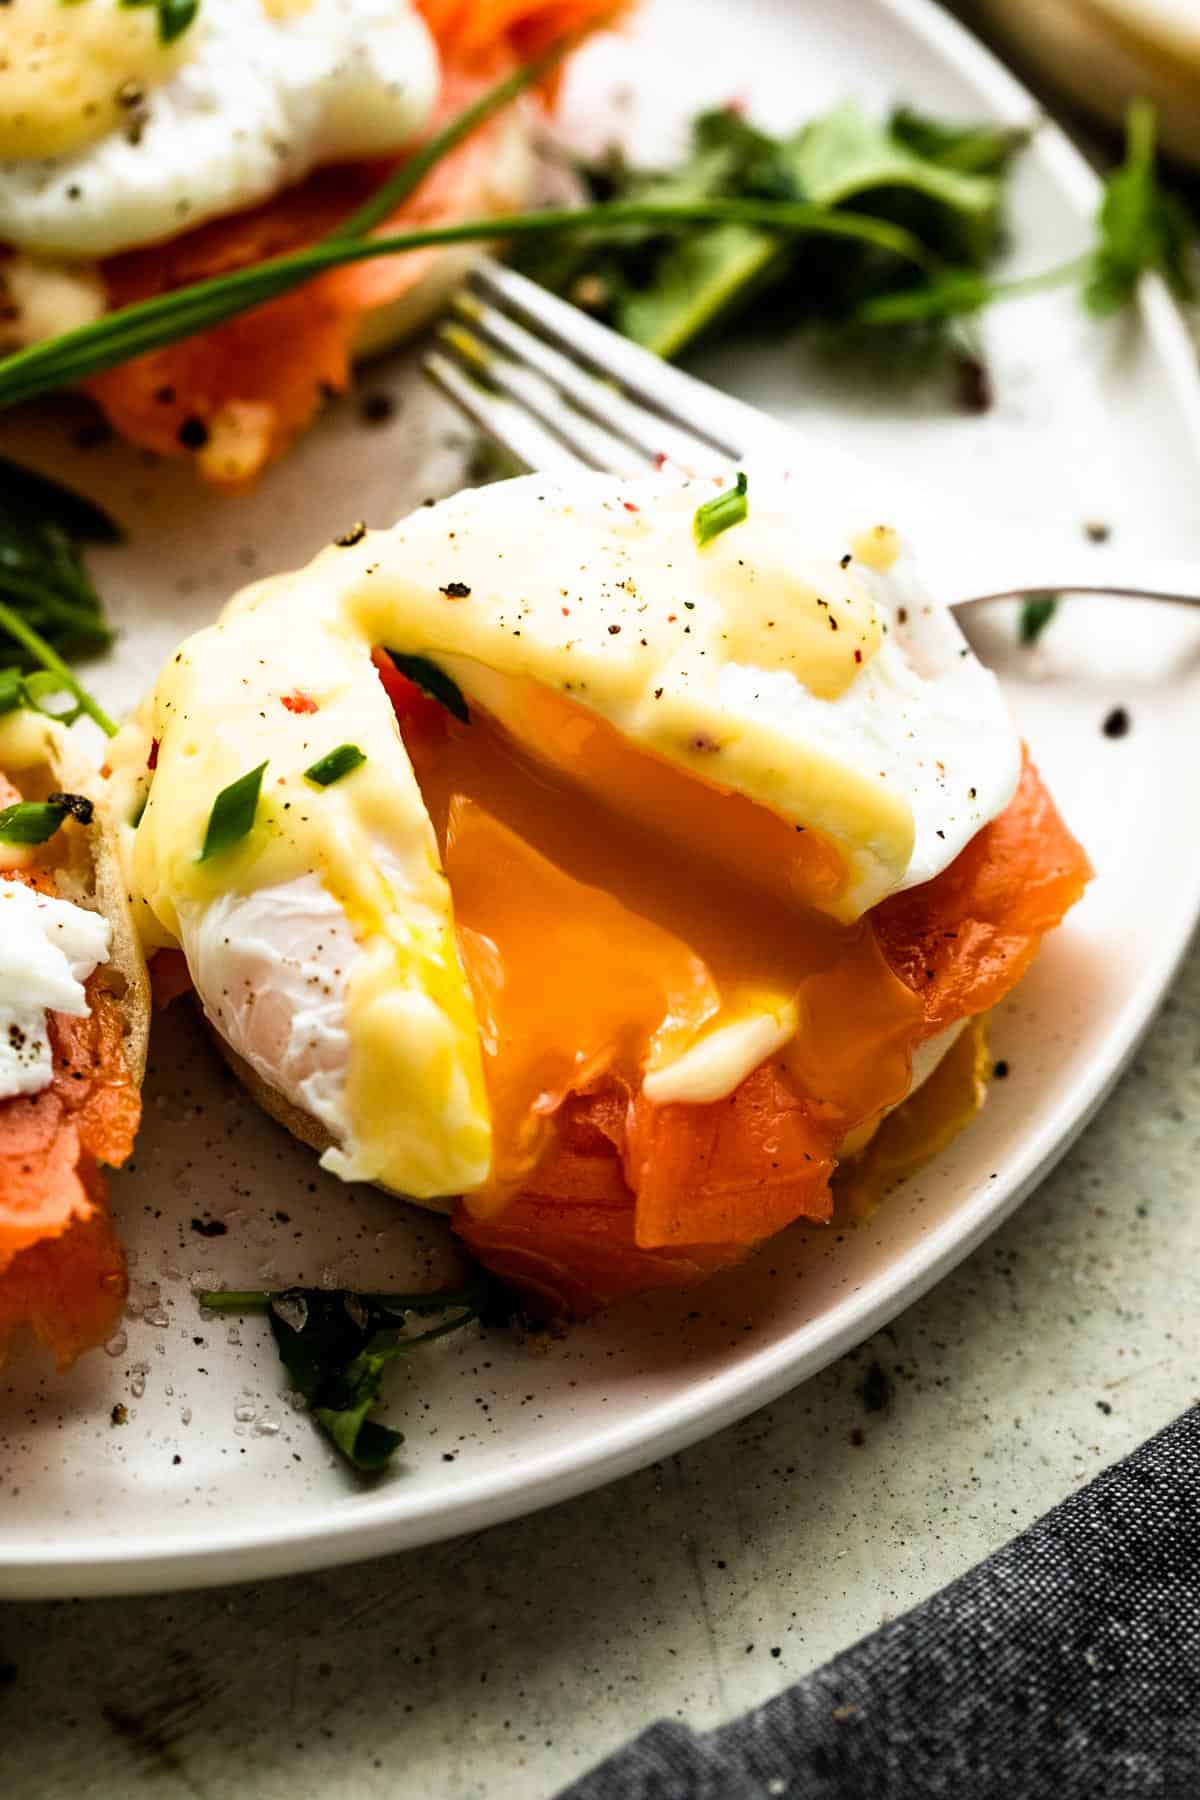 poached egg placed atop an English muffin and smoked salmon; the yolk is oozing out of the egg and onto the smoked salmon.